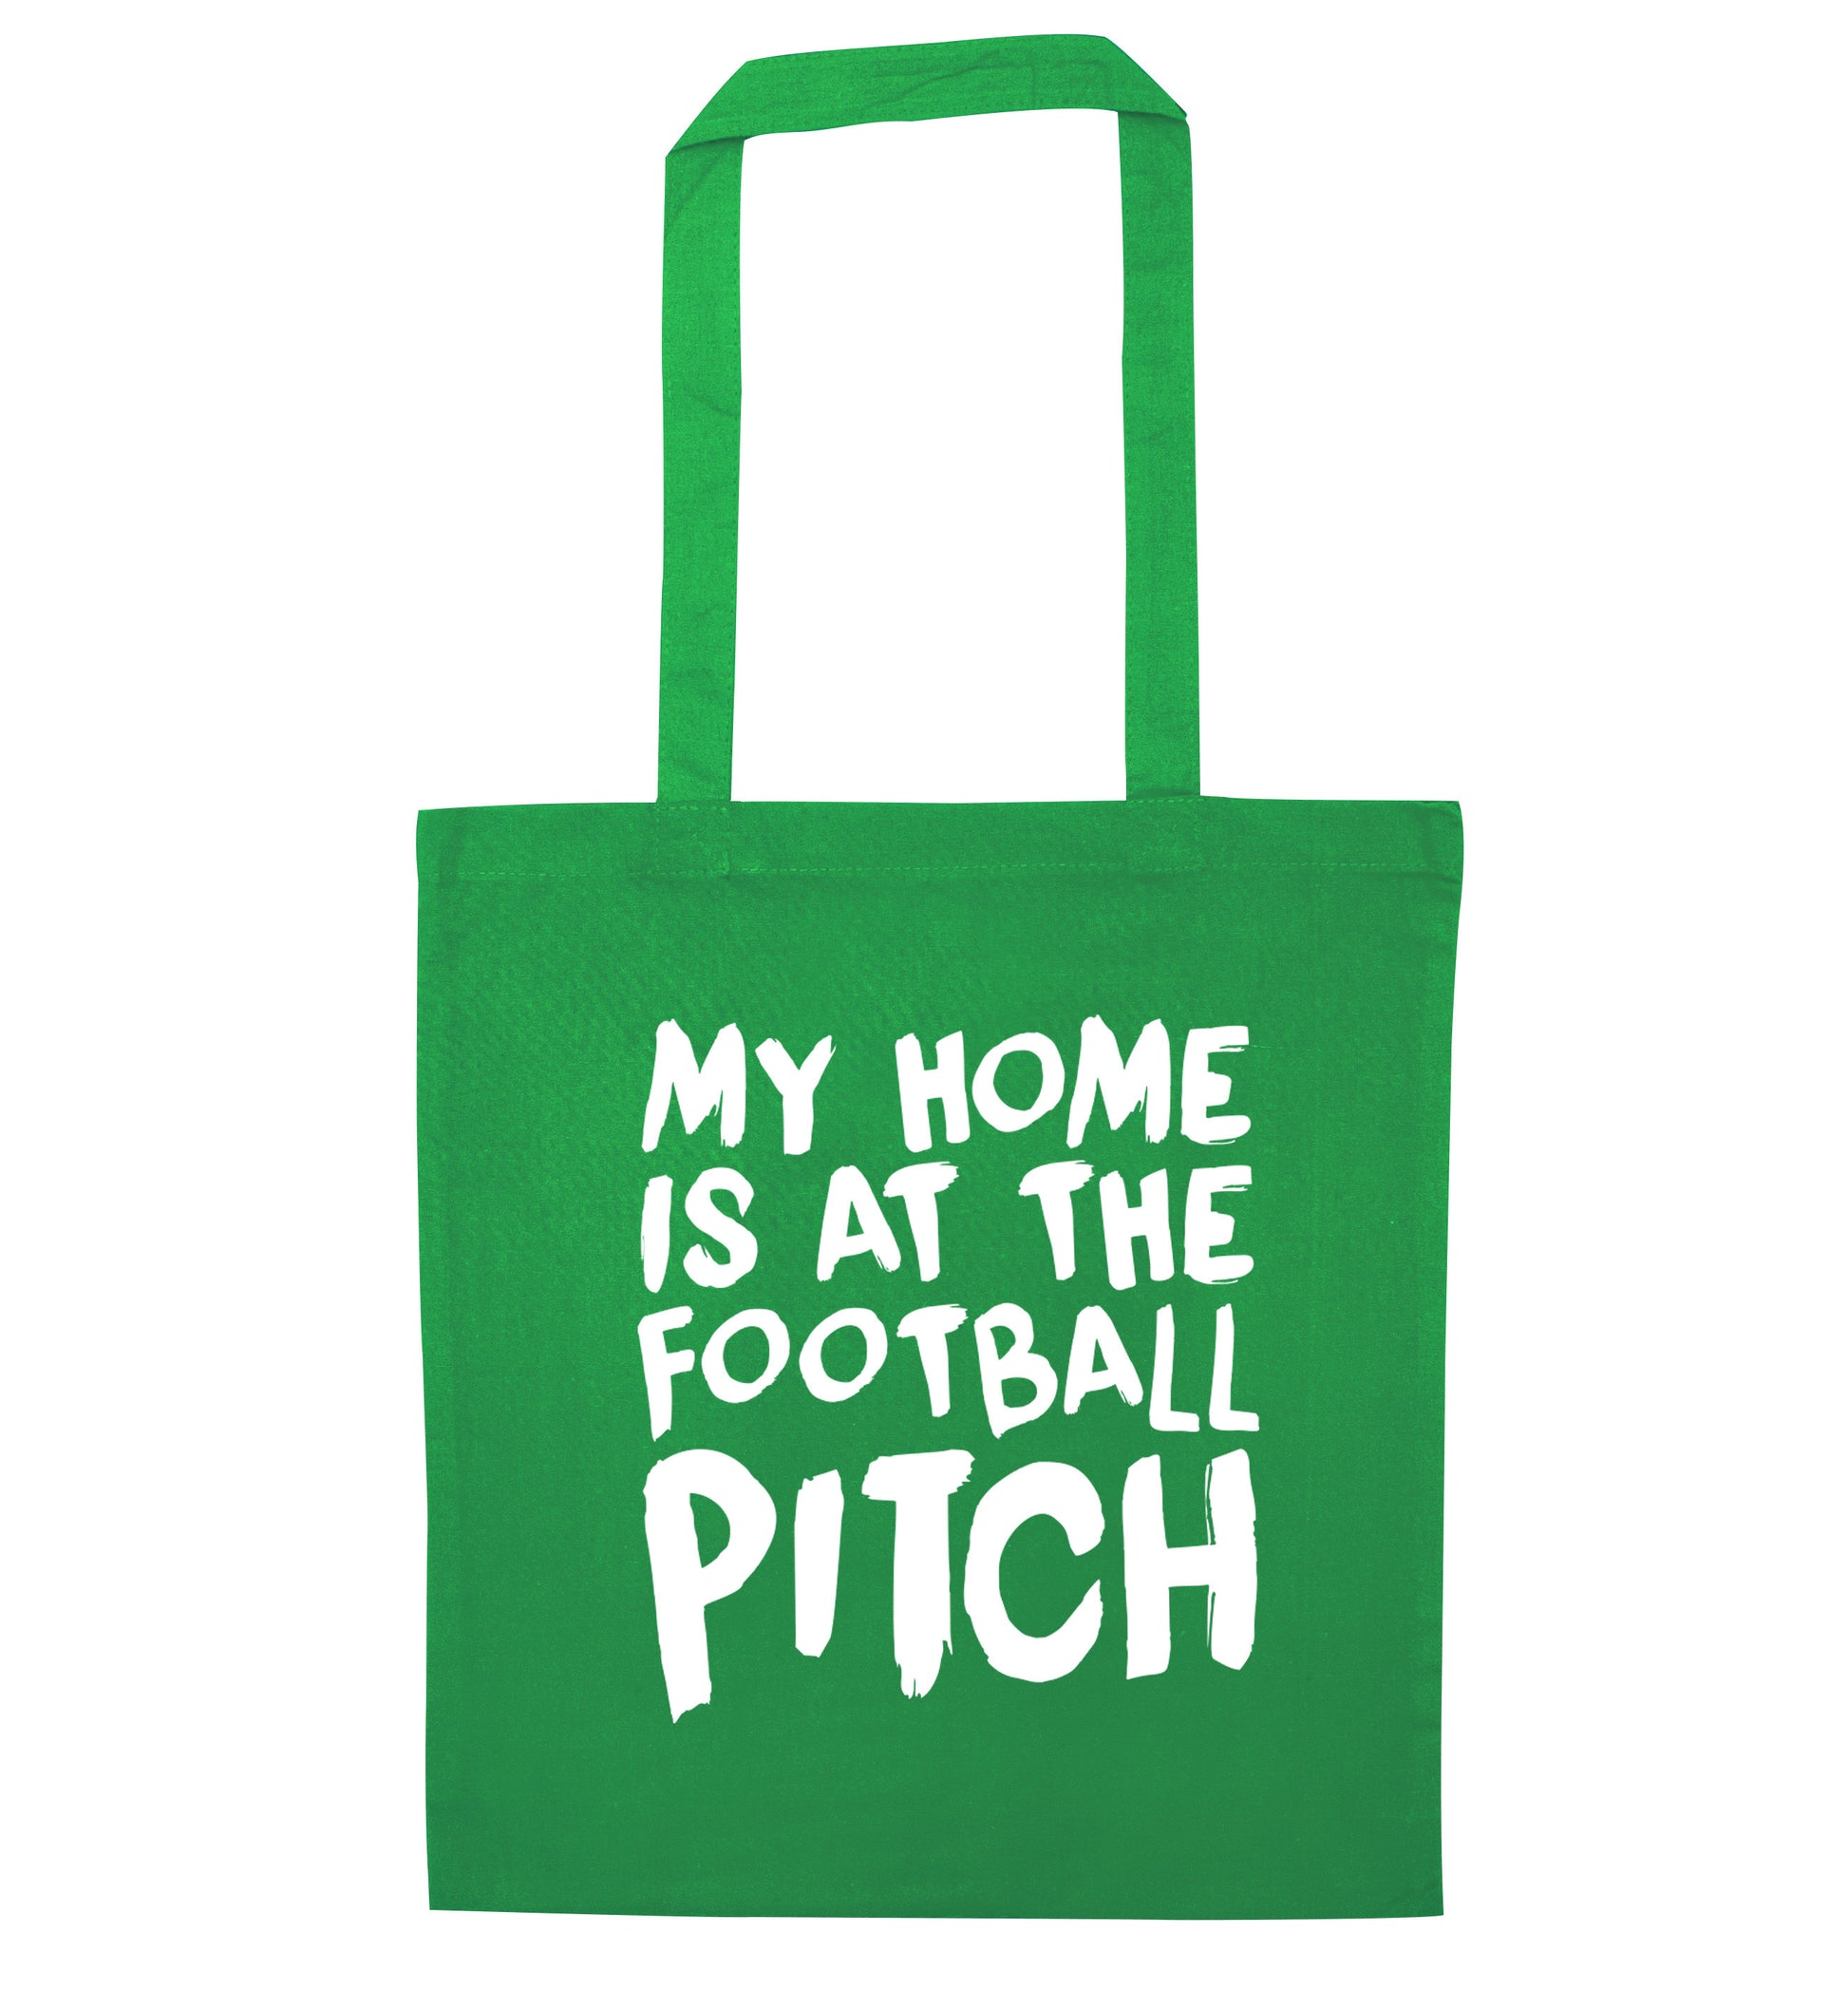 My home is at the football pitch green tote bag